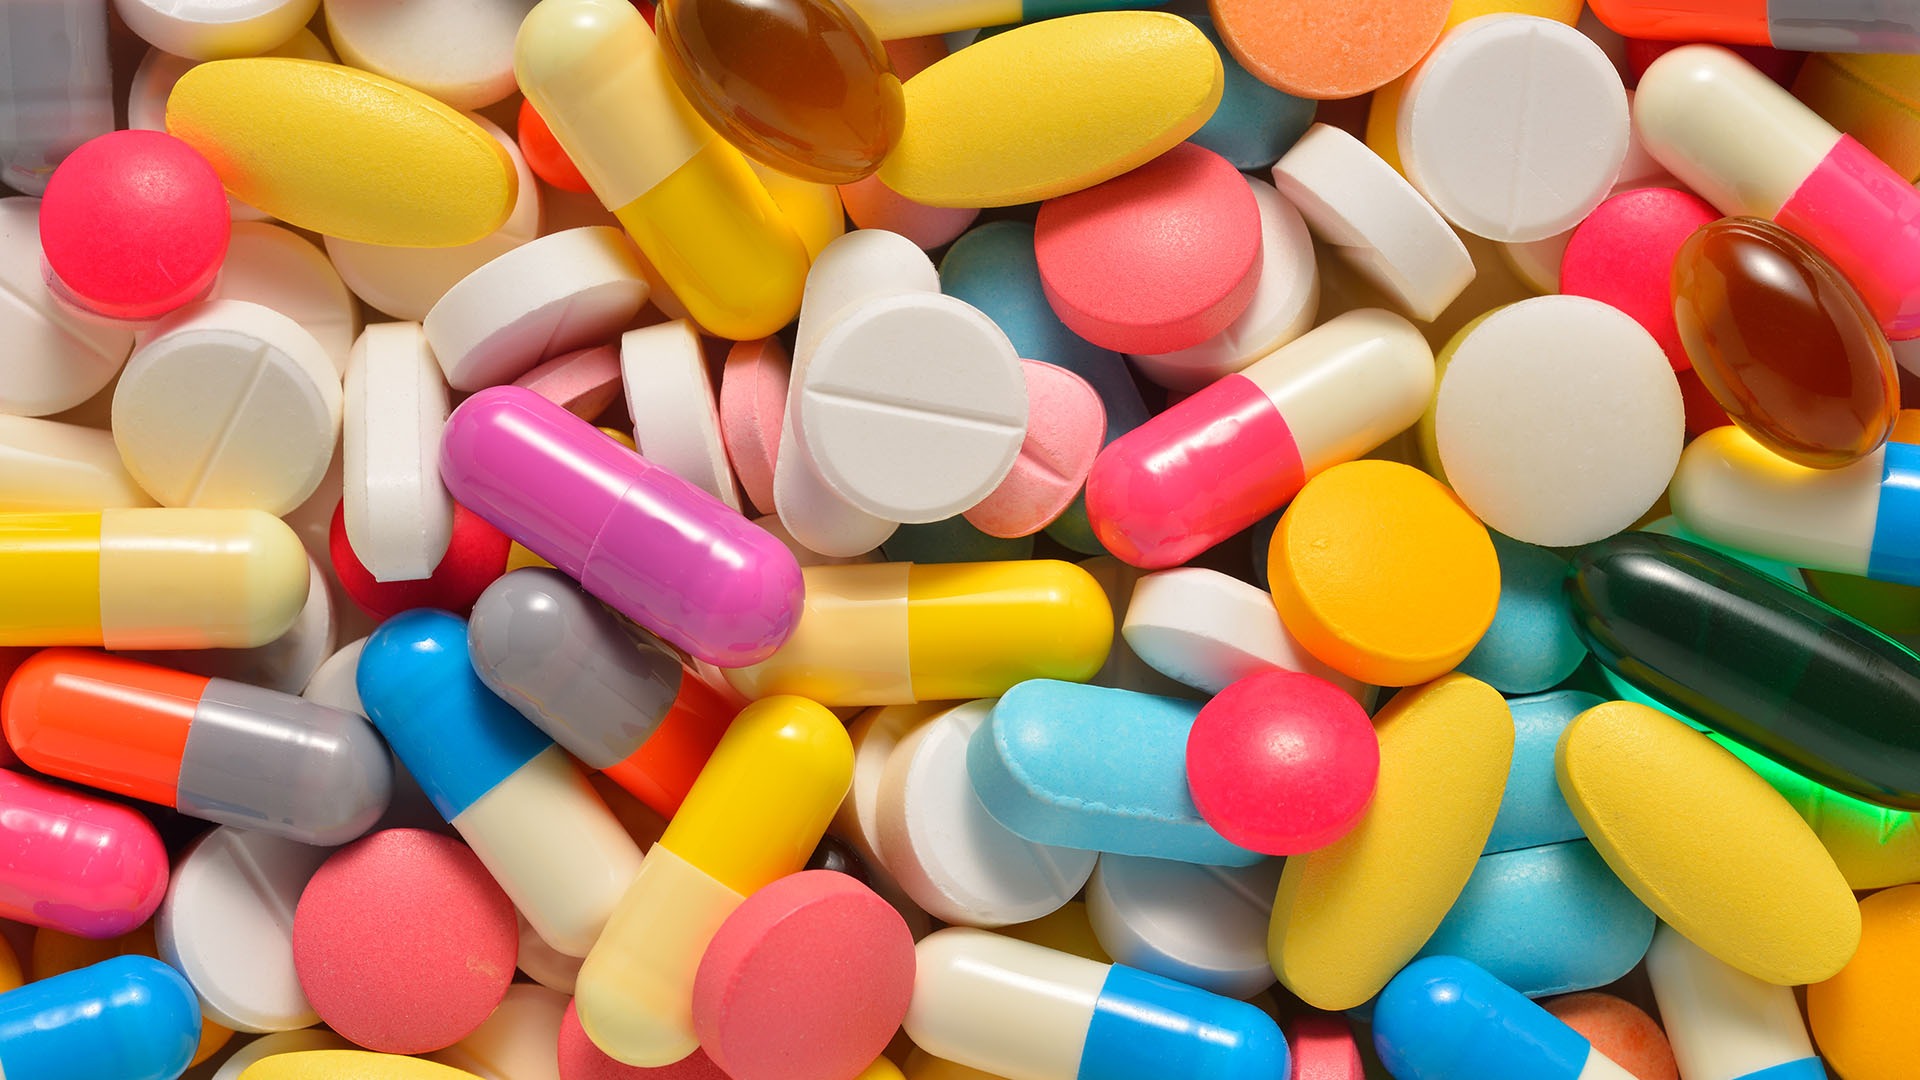 Many colorful medicines